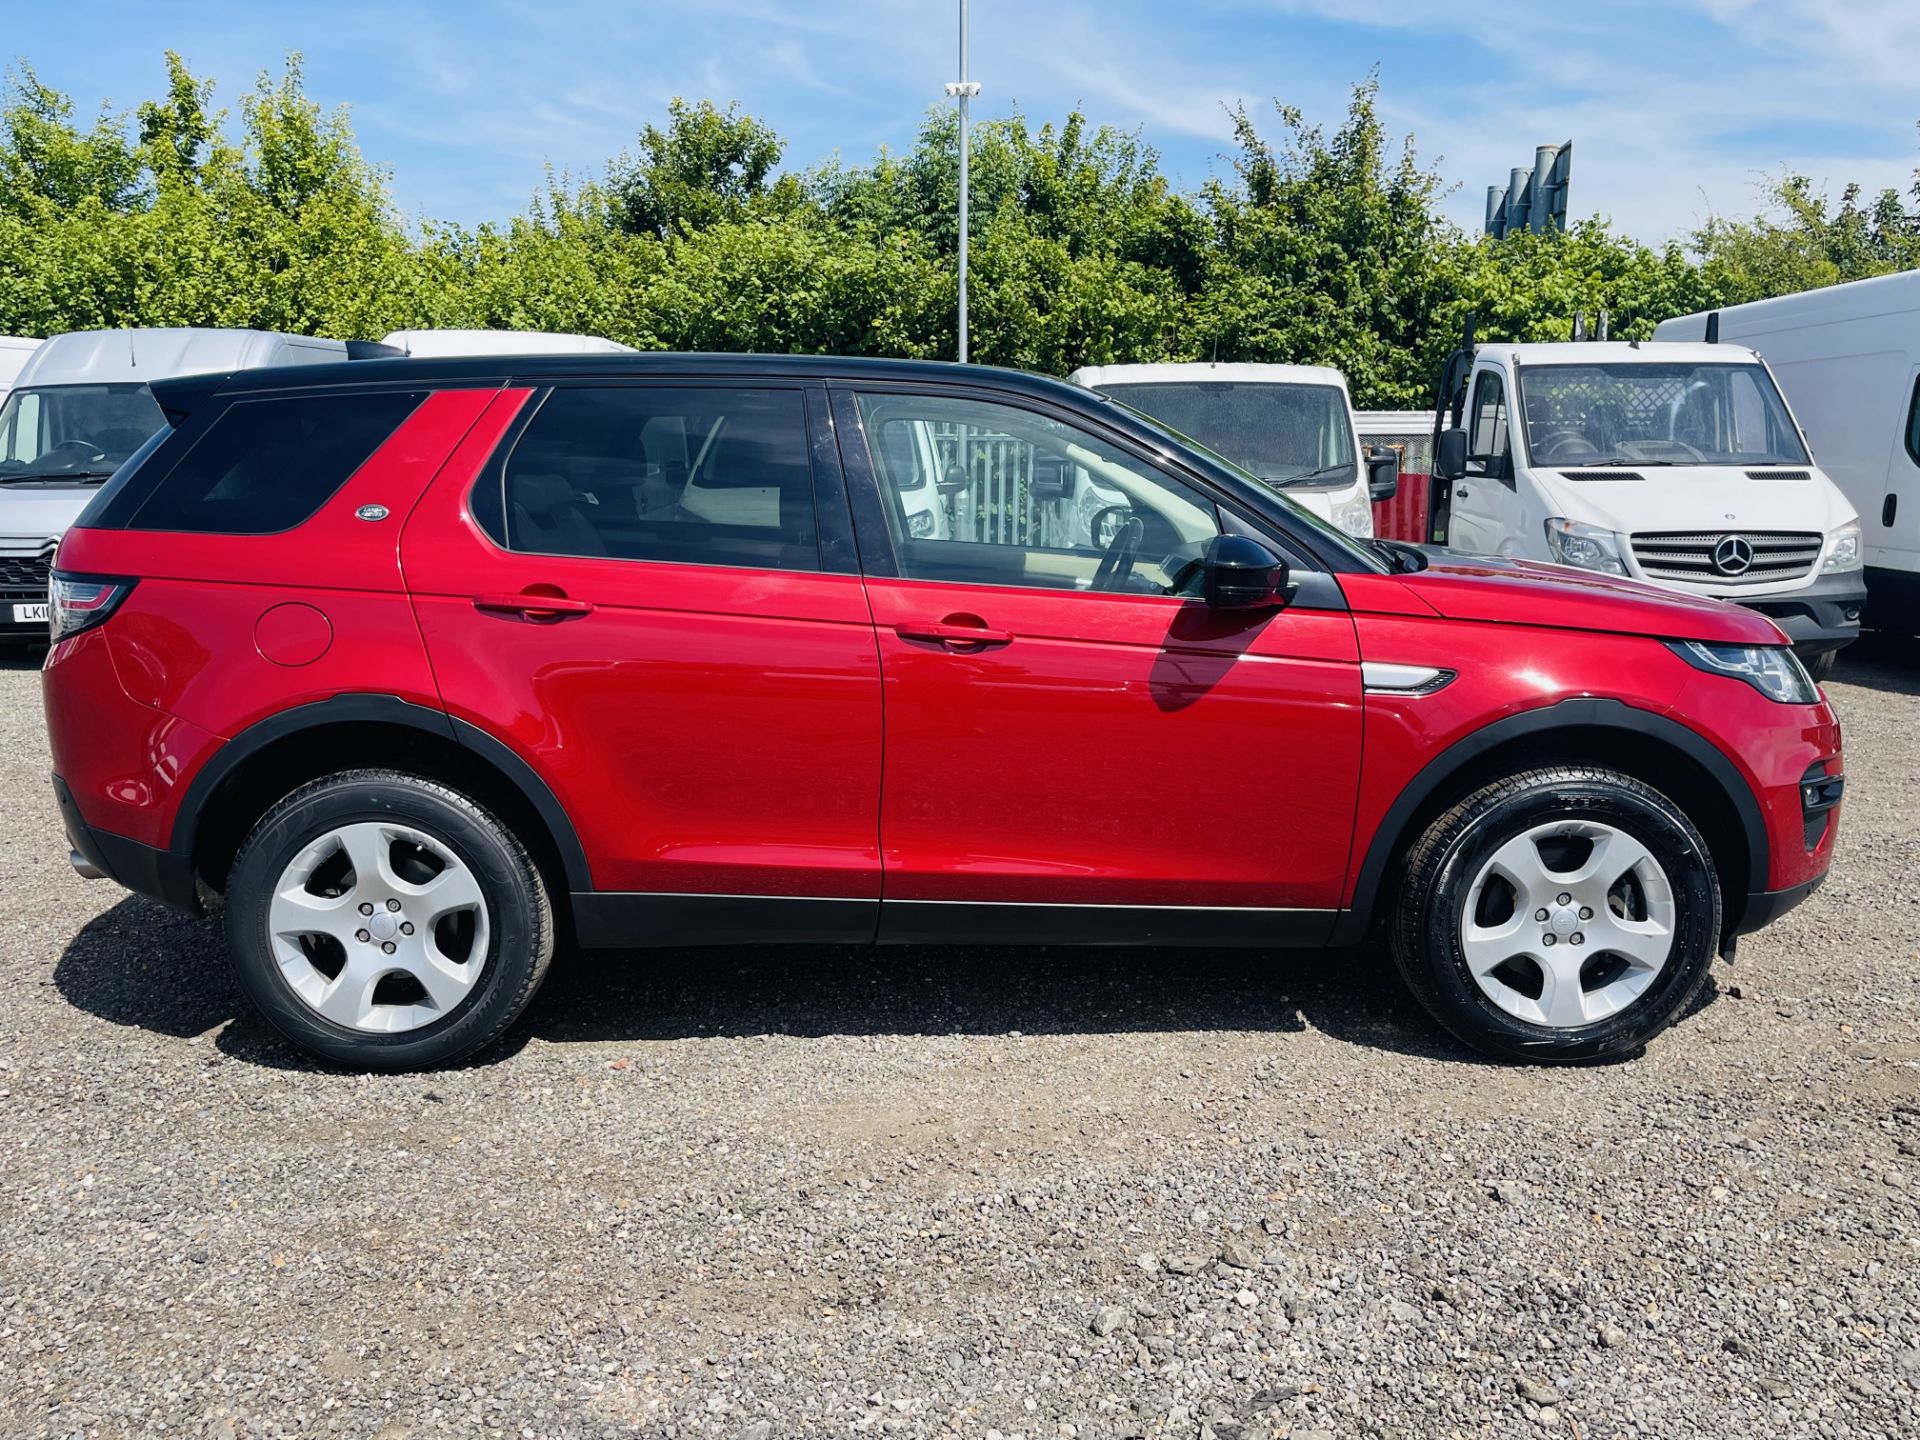 ** ON SALE ** Land Rover Discovery Sport HSE 2.0 ED4 2017 '67 Reg' Sat Nav - Panoramic Glass Roof - Image 16 of 33